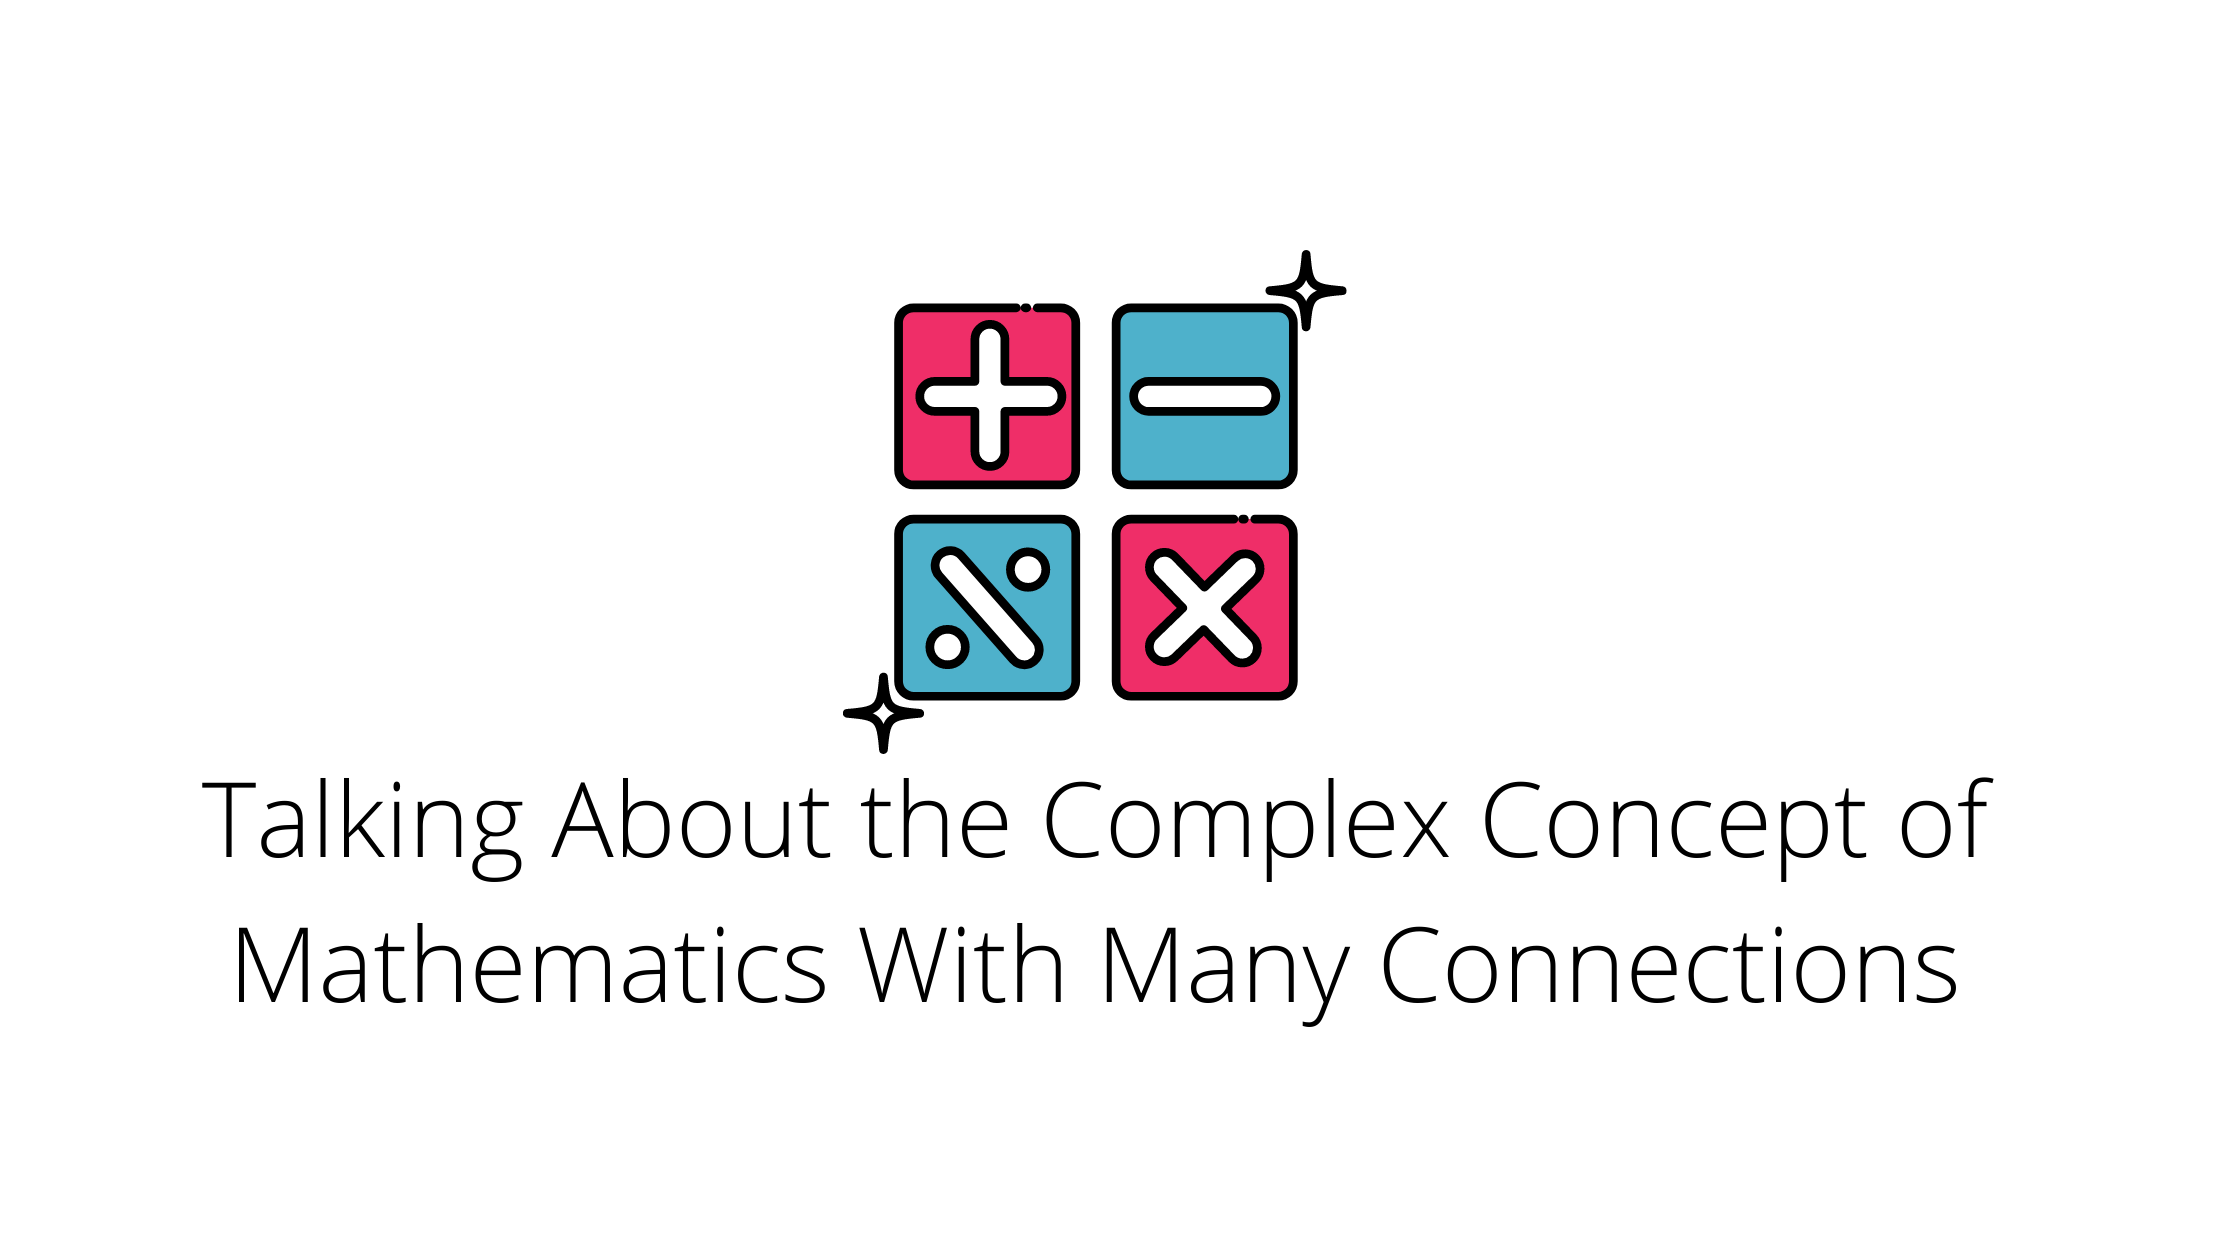 Talking About the Complex Concept of Mathematics With Many Connections